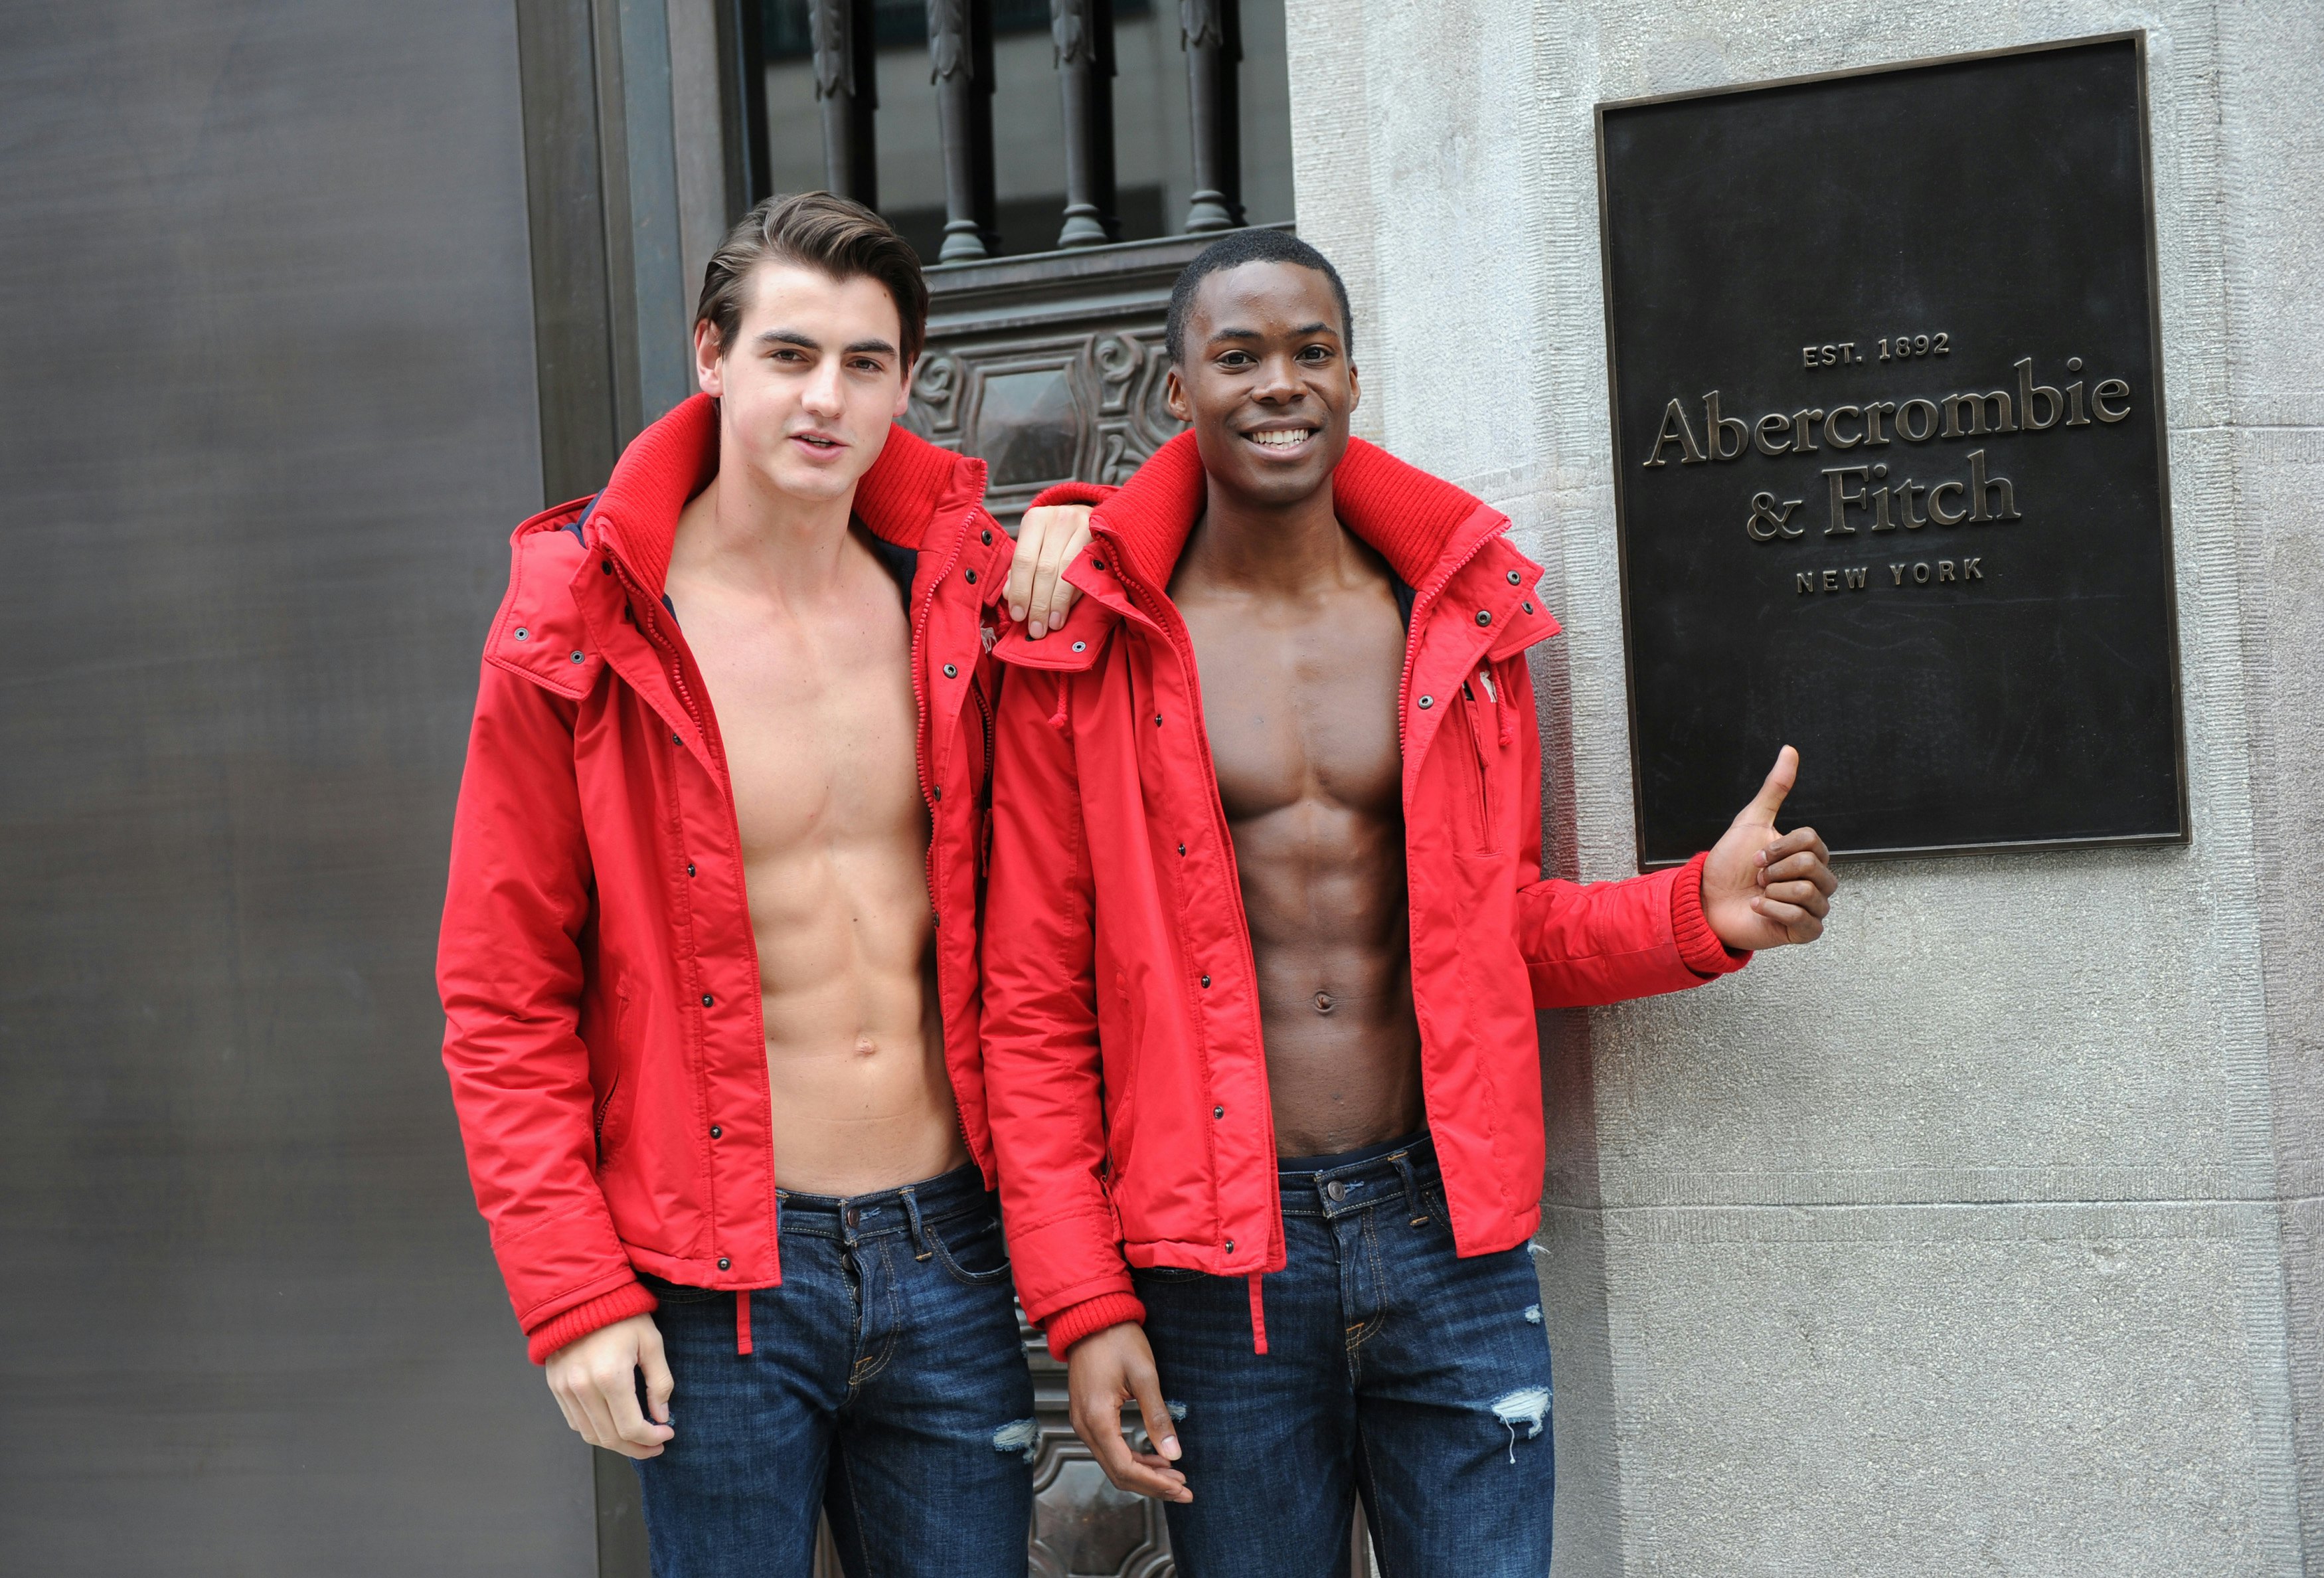 abercrombie and fitch employee handbook